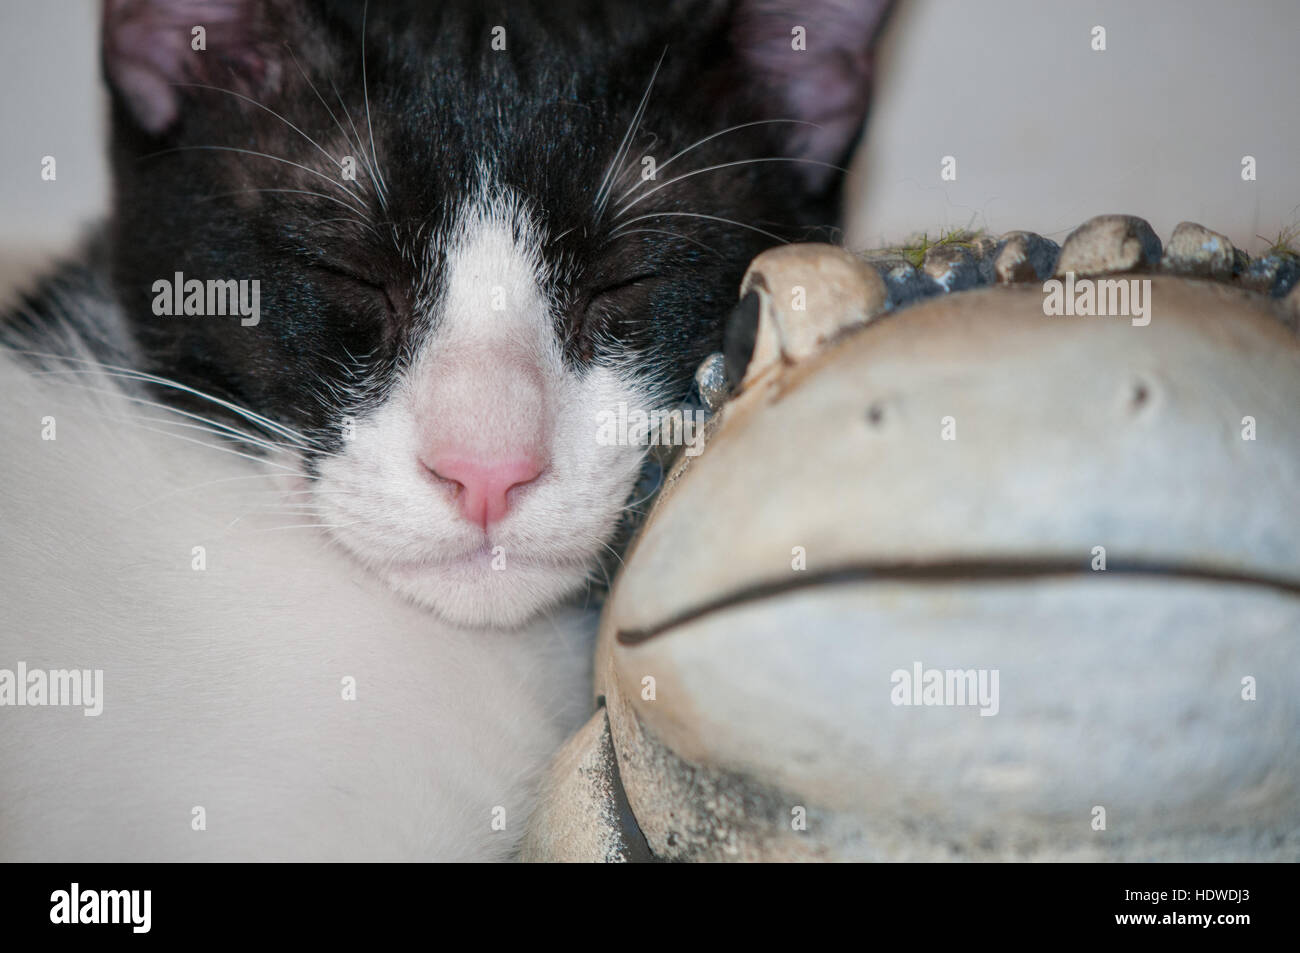 Cute cat sleeping in a stone figure of a frog Stock Photo